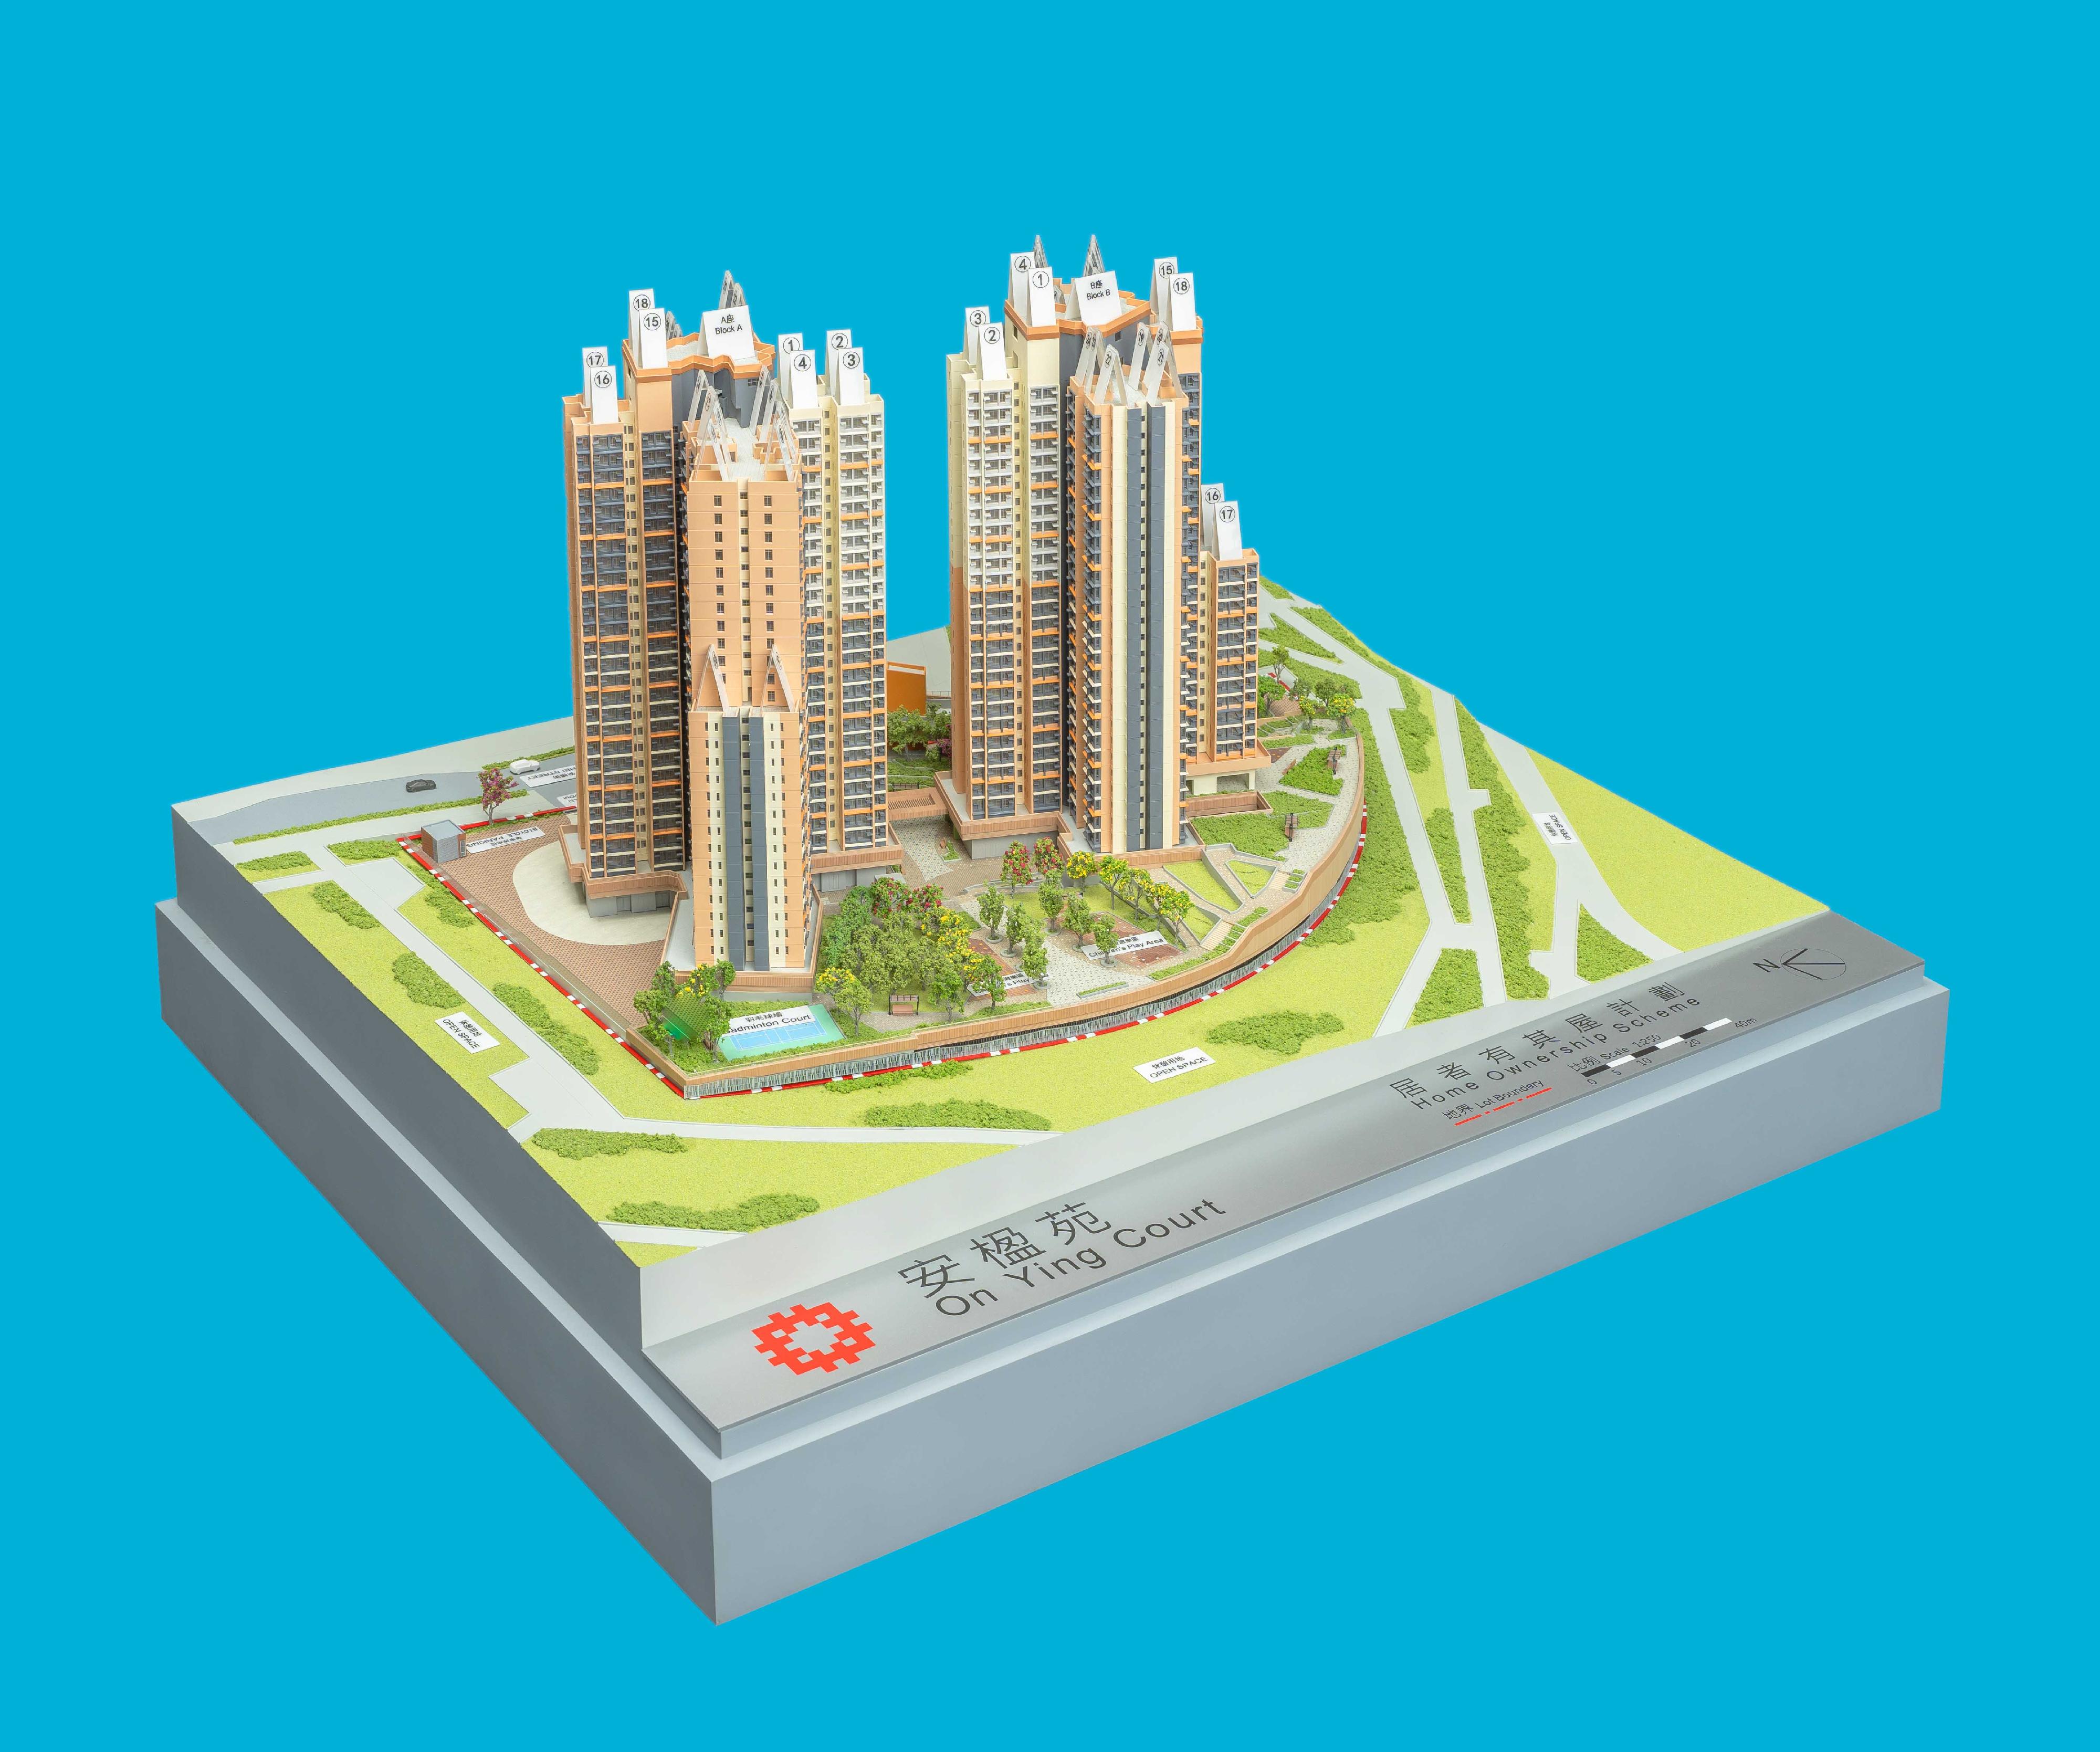 Applications for purchase under the Sale of Home Ownership Scheme Flats 2023 will start on July 31. Photo shows a model of On Ying Court, a new development project under the scheme.






